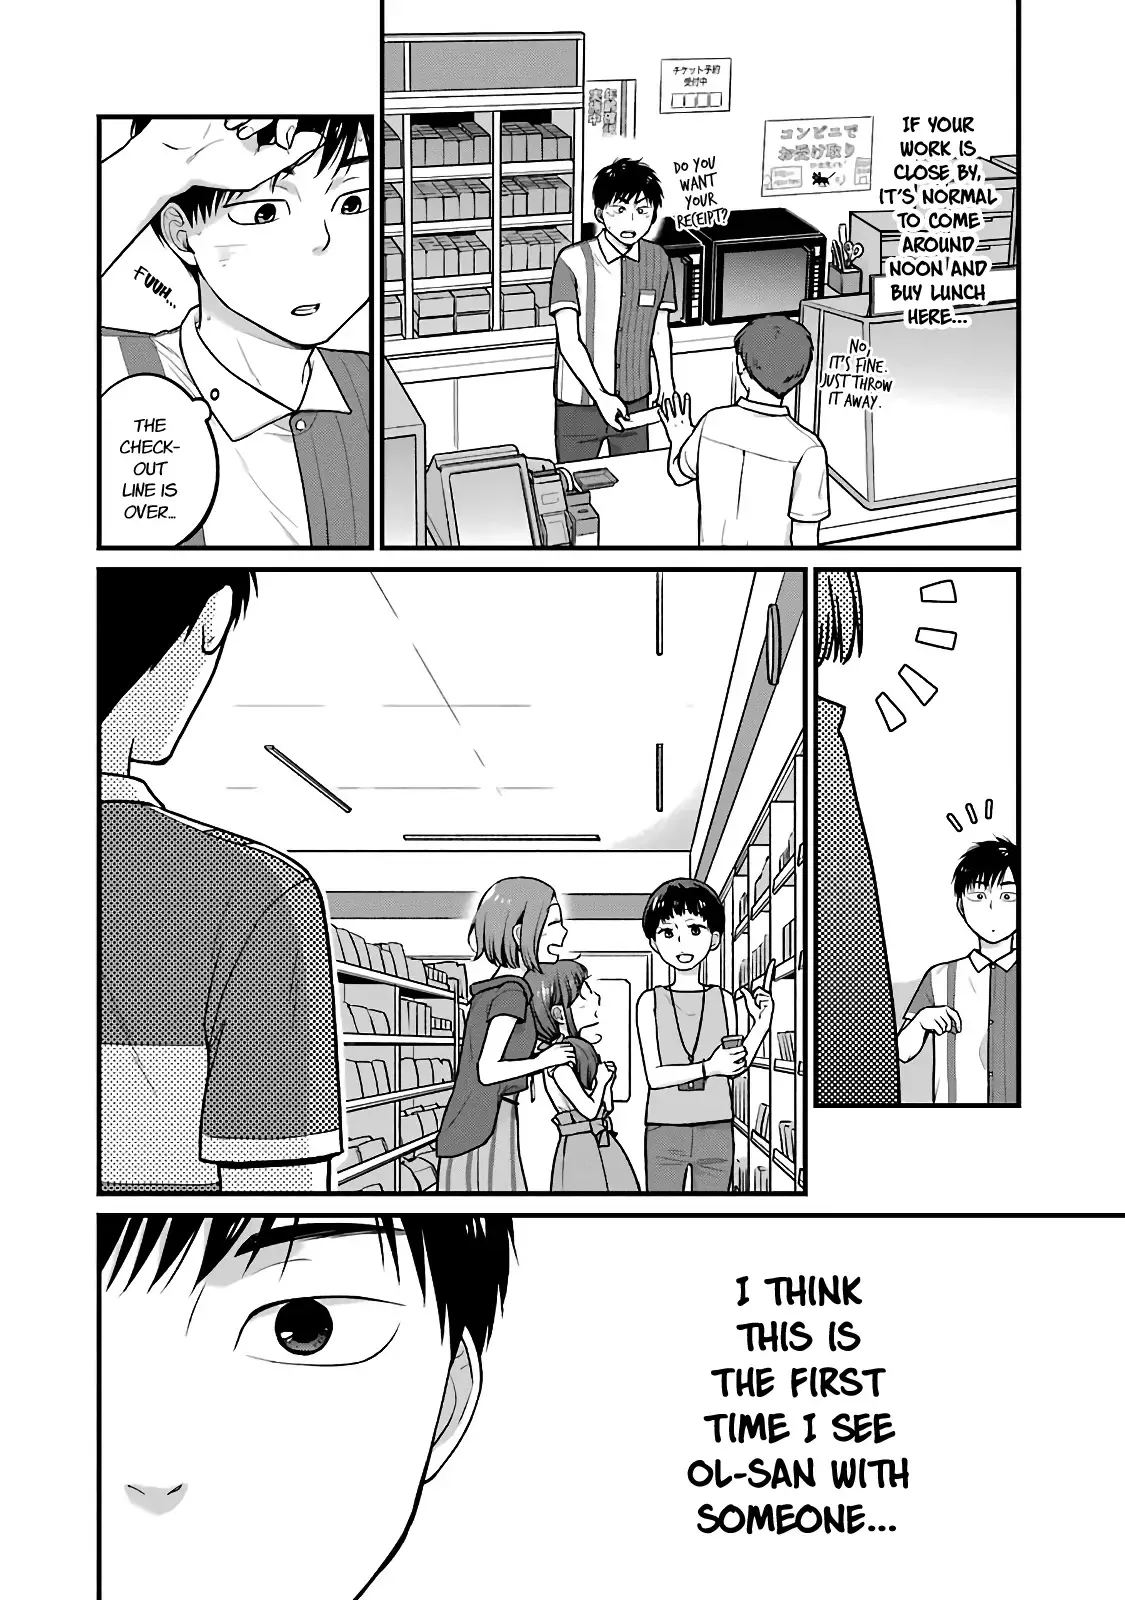 5 Minutes With You At A Convenience Store - 34 page 7